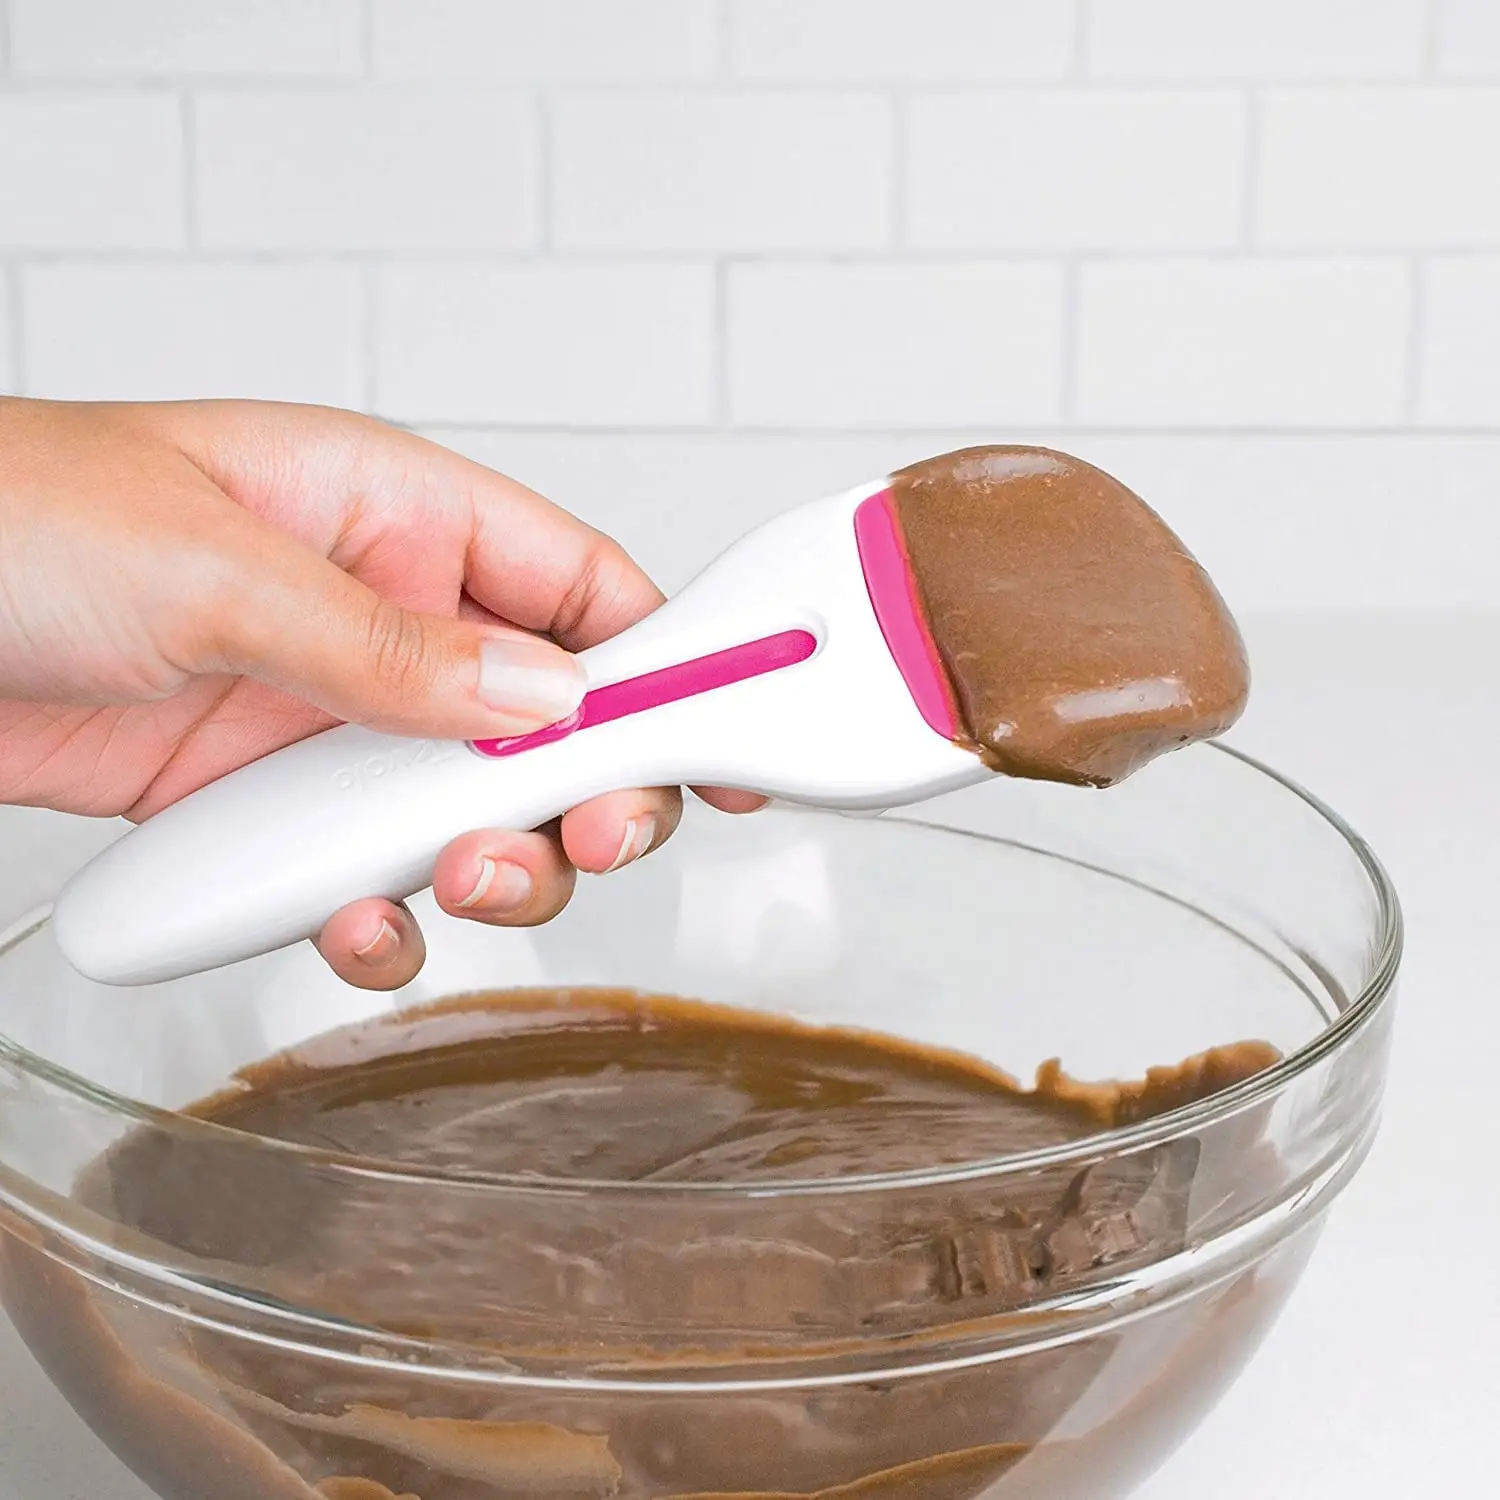 https://ae01.alicdn.com/kf/Scf0ffdf0a57041cca46cd2d7e43e581aI/Scoop-With-Silicone-Plunger-Measures-Equal-Cupcakes-or-Muffins-One-Touch-Sliding-Button-Dispenses-Batter-Dishwasher.jpg